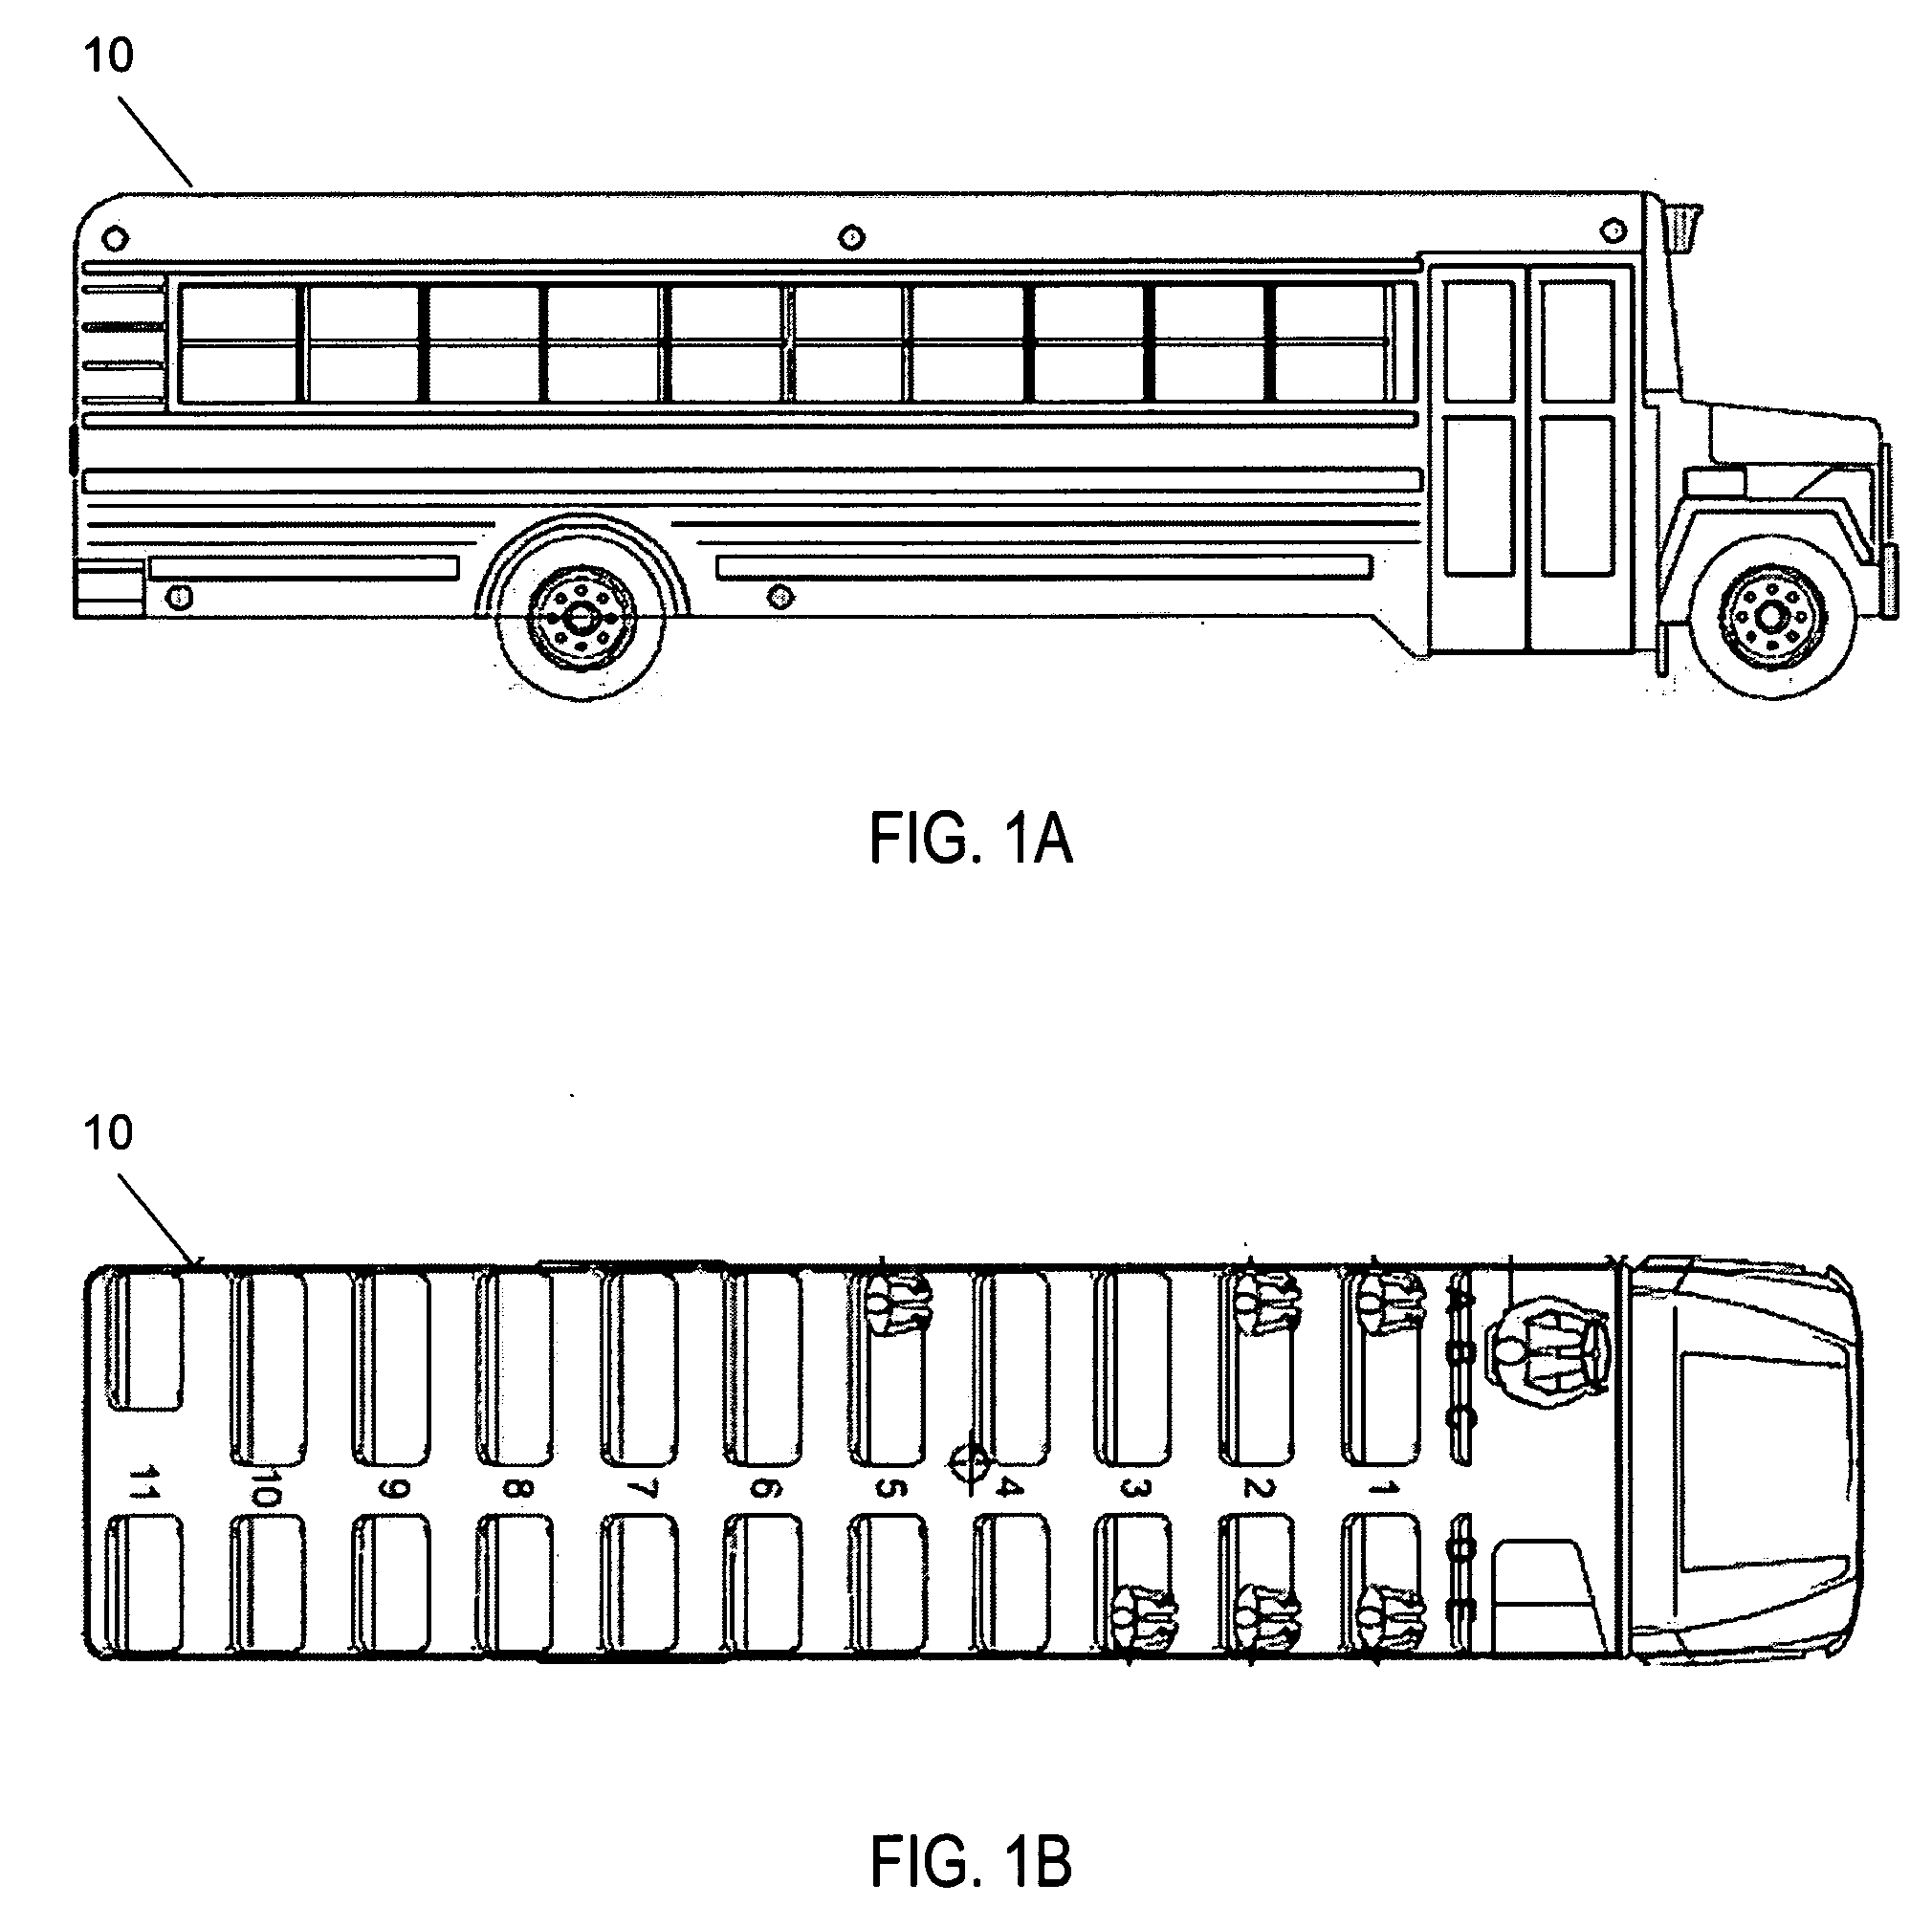 Occupant monitoring and restraint status system